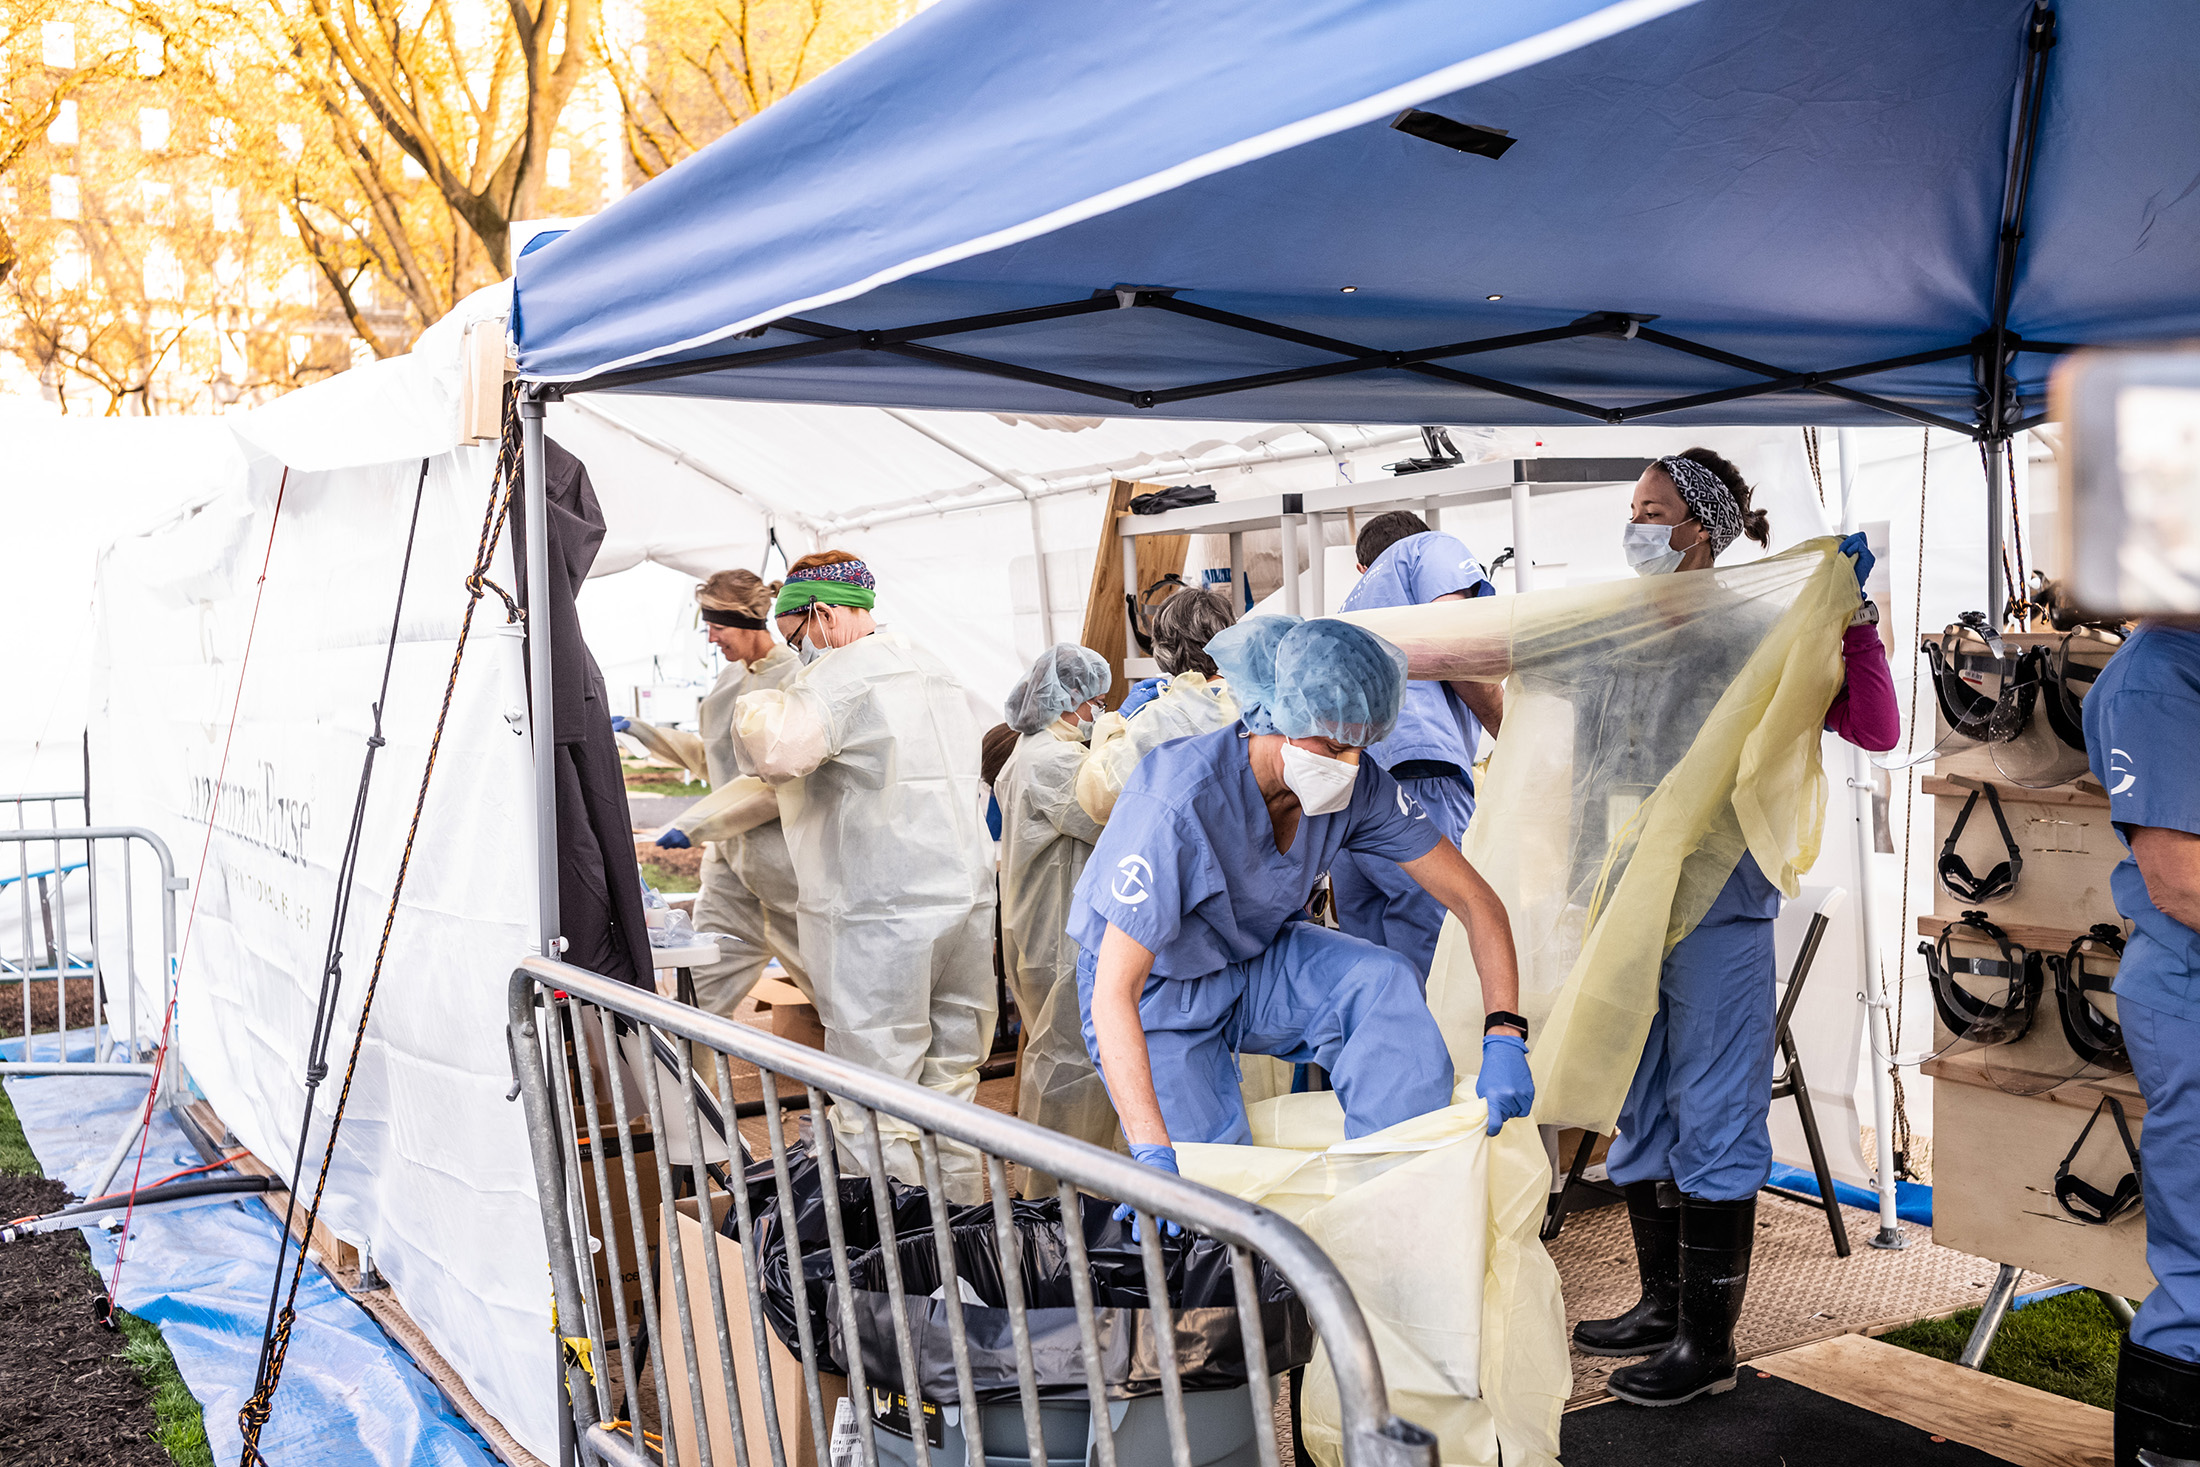 Medical workers putting on PPEs at the beginning of their shift at the emergency field hospital in Central Park on April 08.